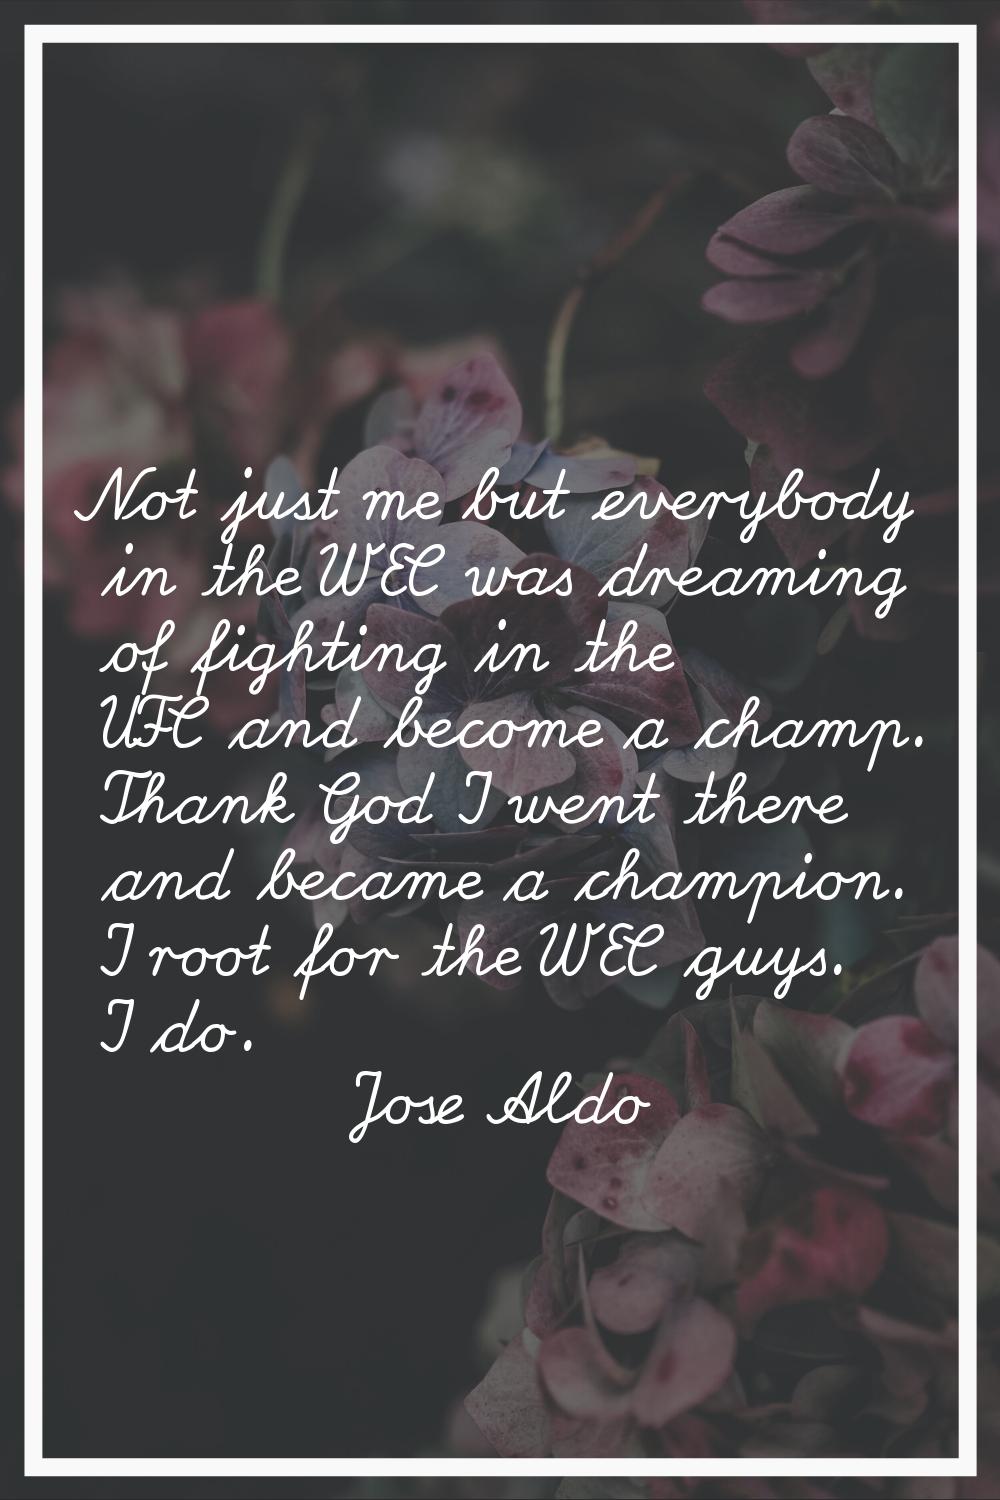 Not just me but everybody in the WEC was dreaming of fighting in the UFC and become a champ. Thank 